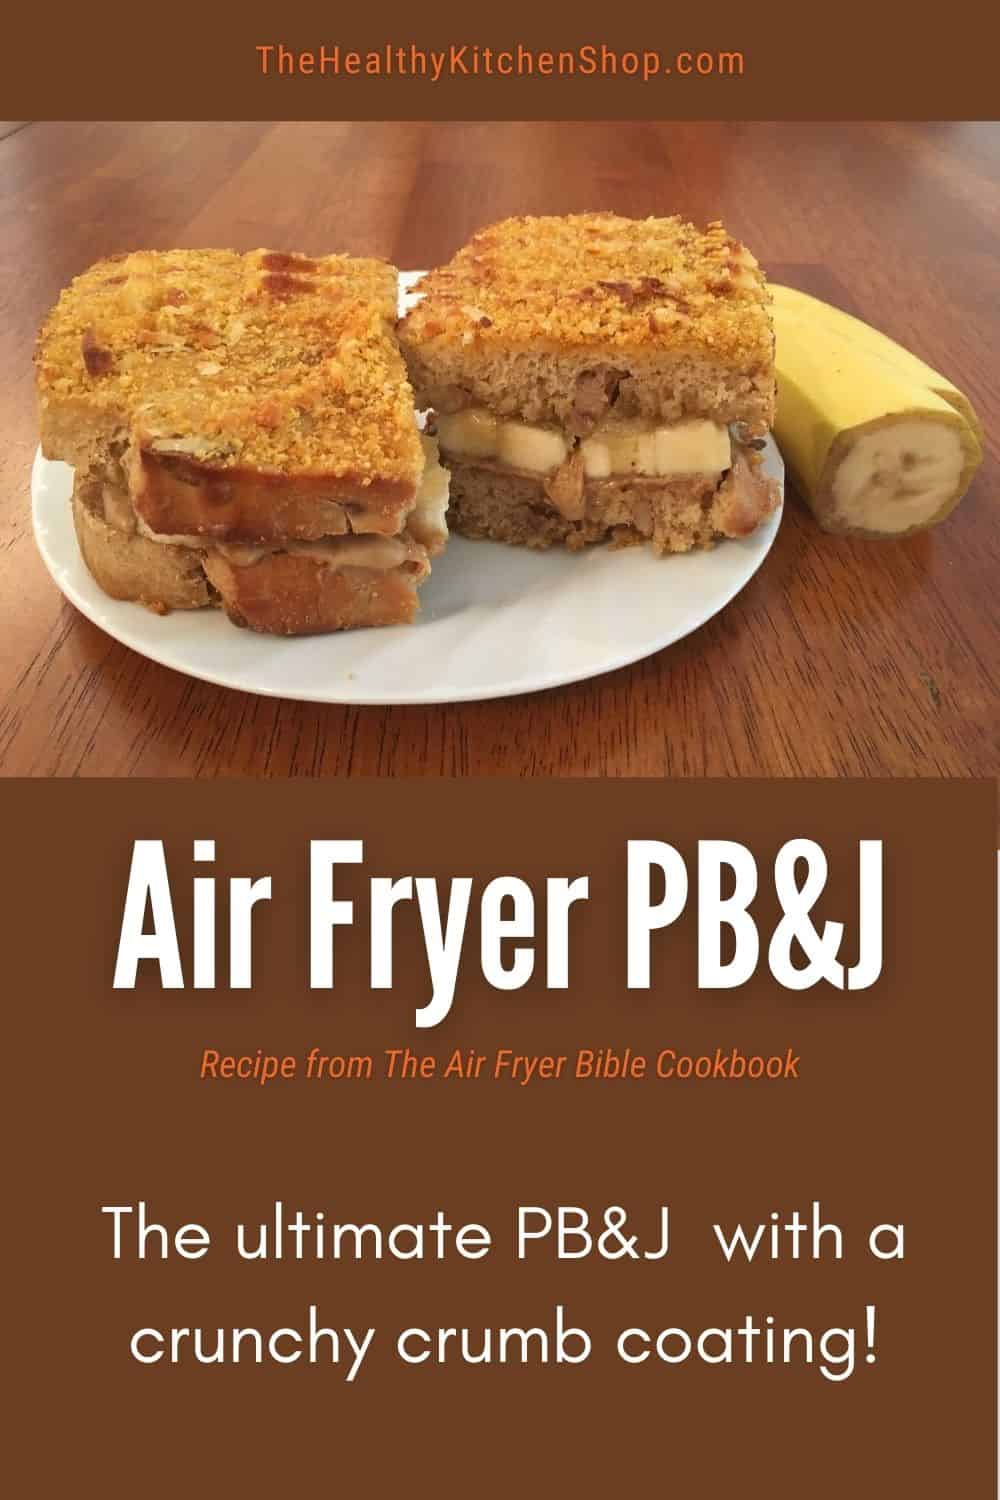 Air Fried PB&J from The Air Fryer Bible Cookbook